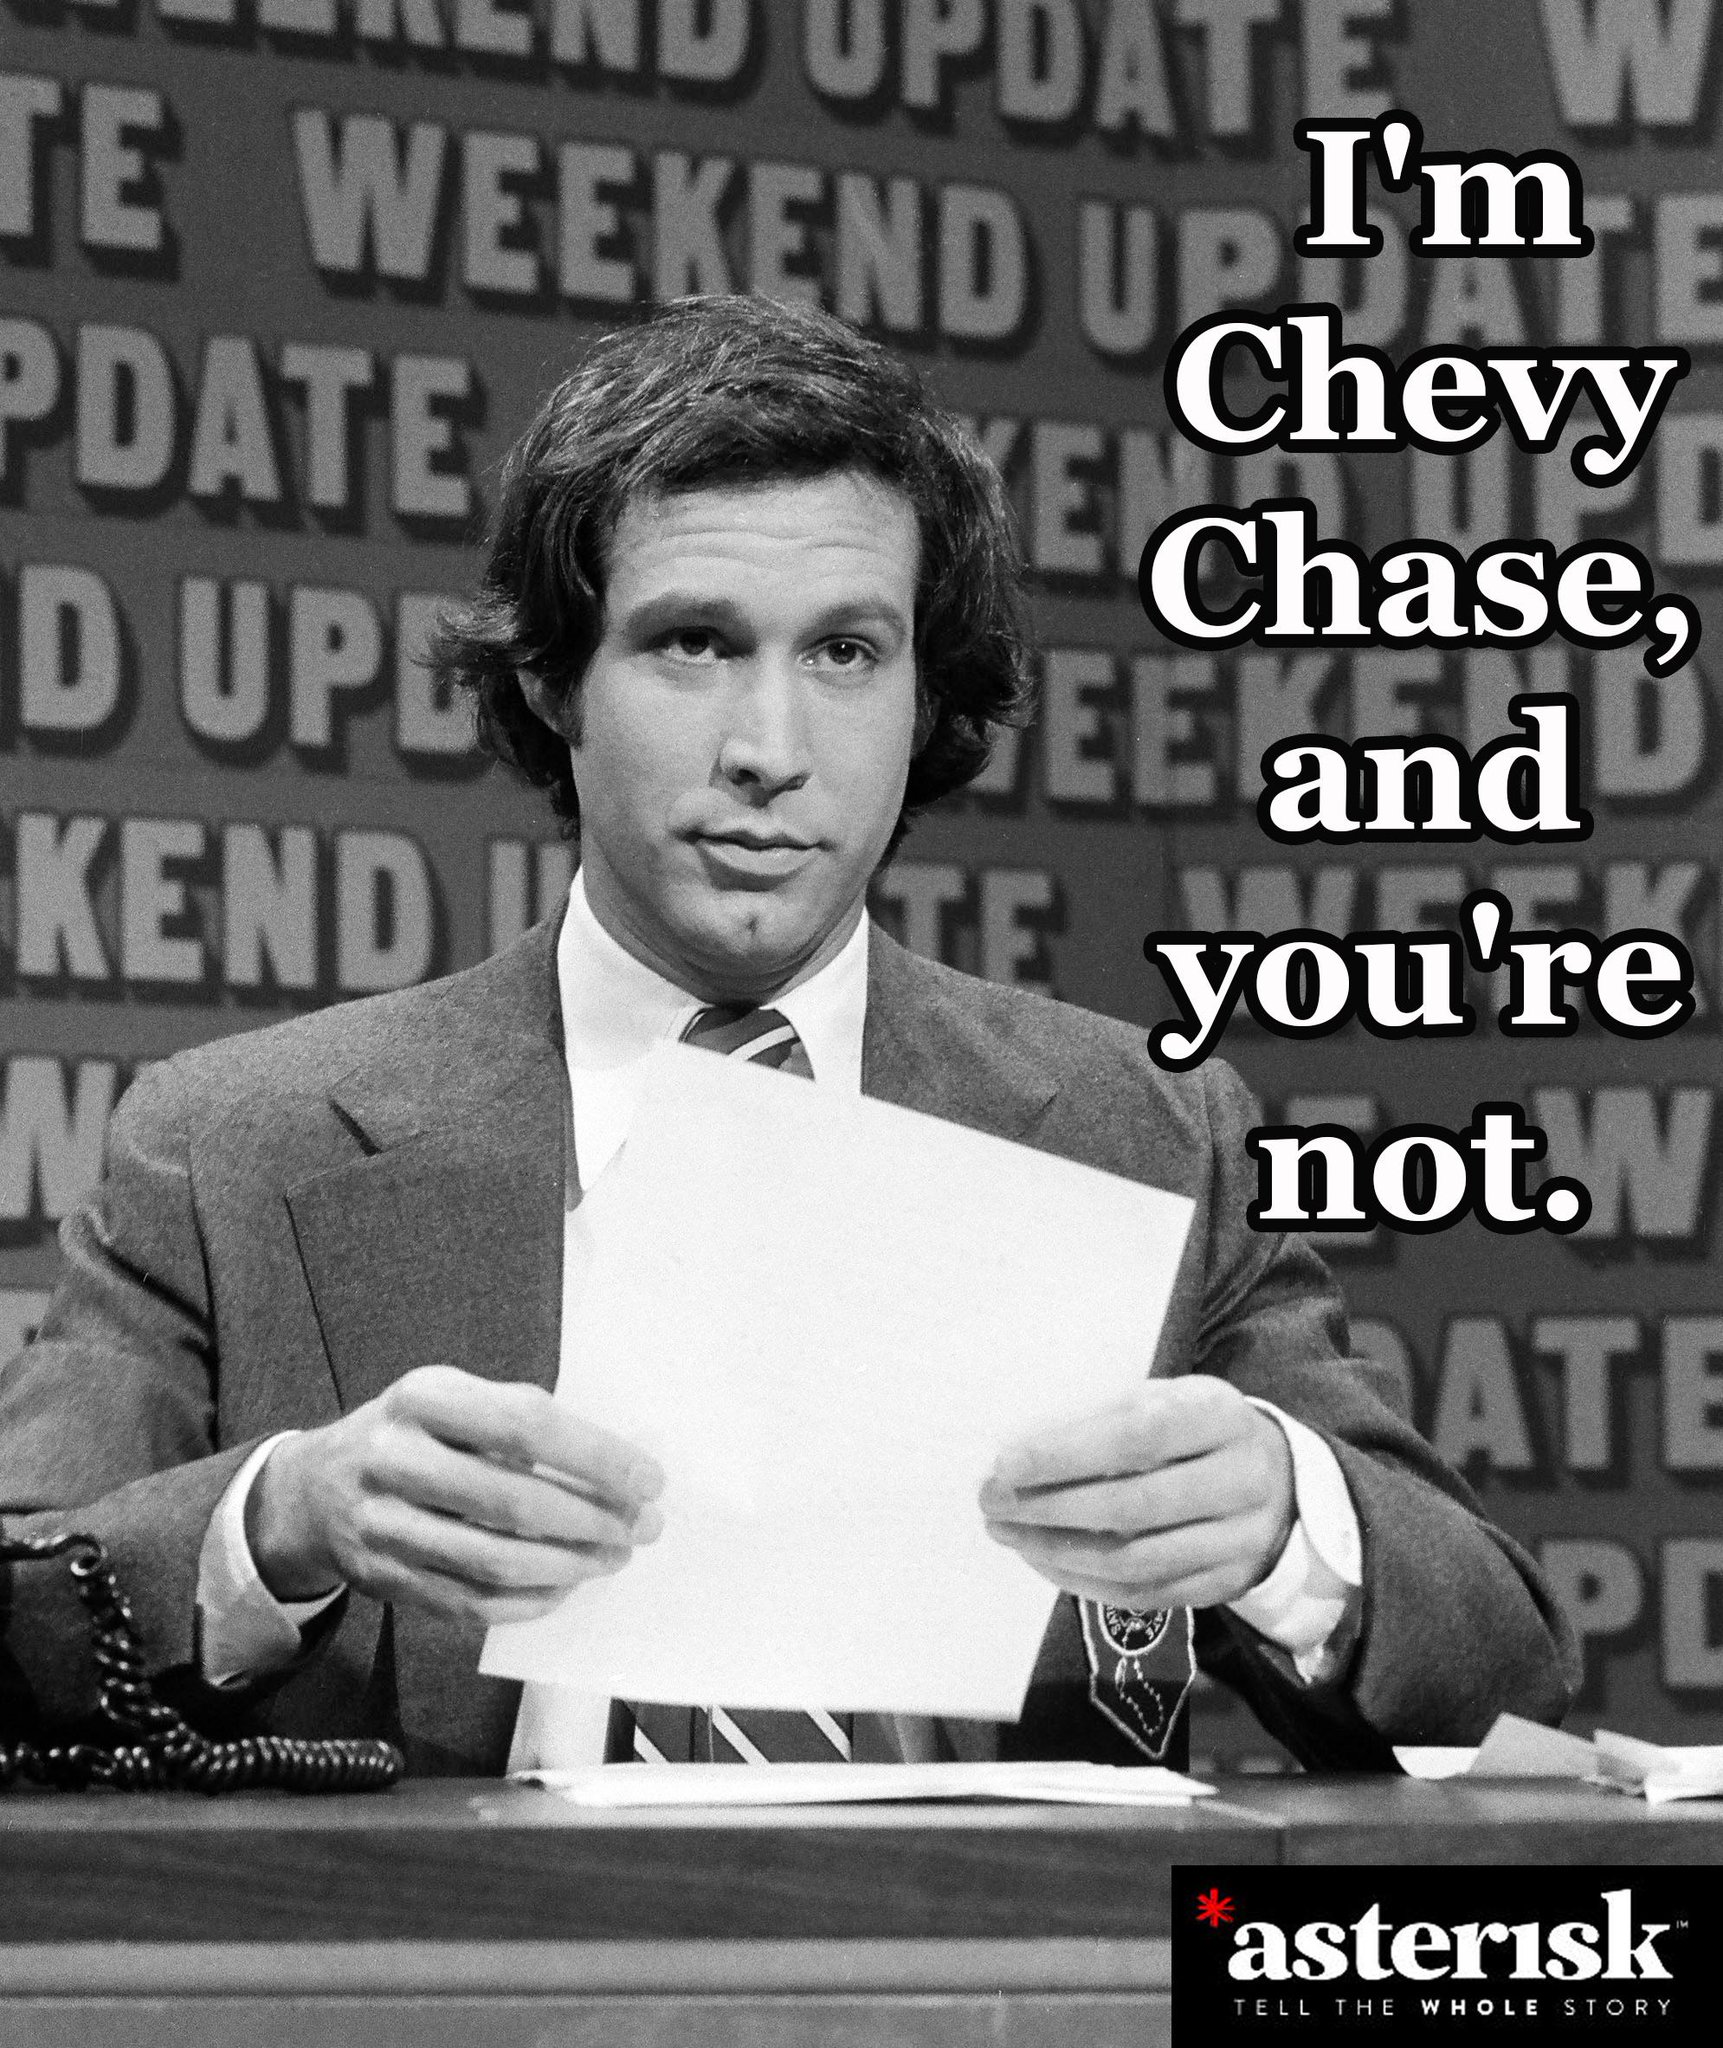 He\s the birthday boy, and you\re not. Happy 72nd birthday, Chevy Chase.  